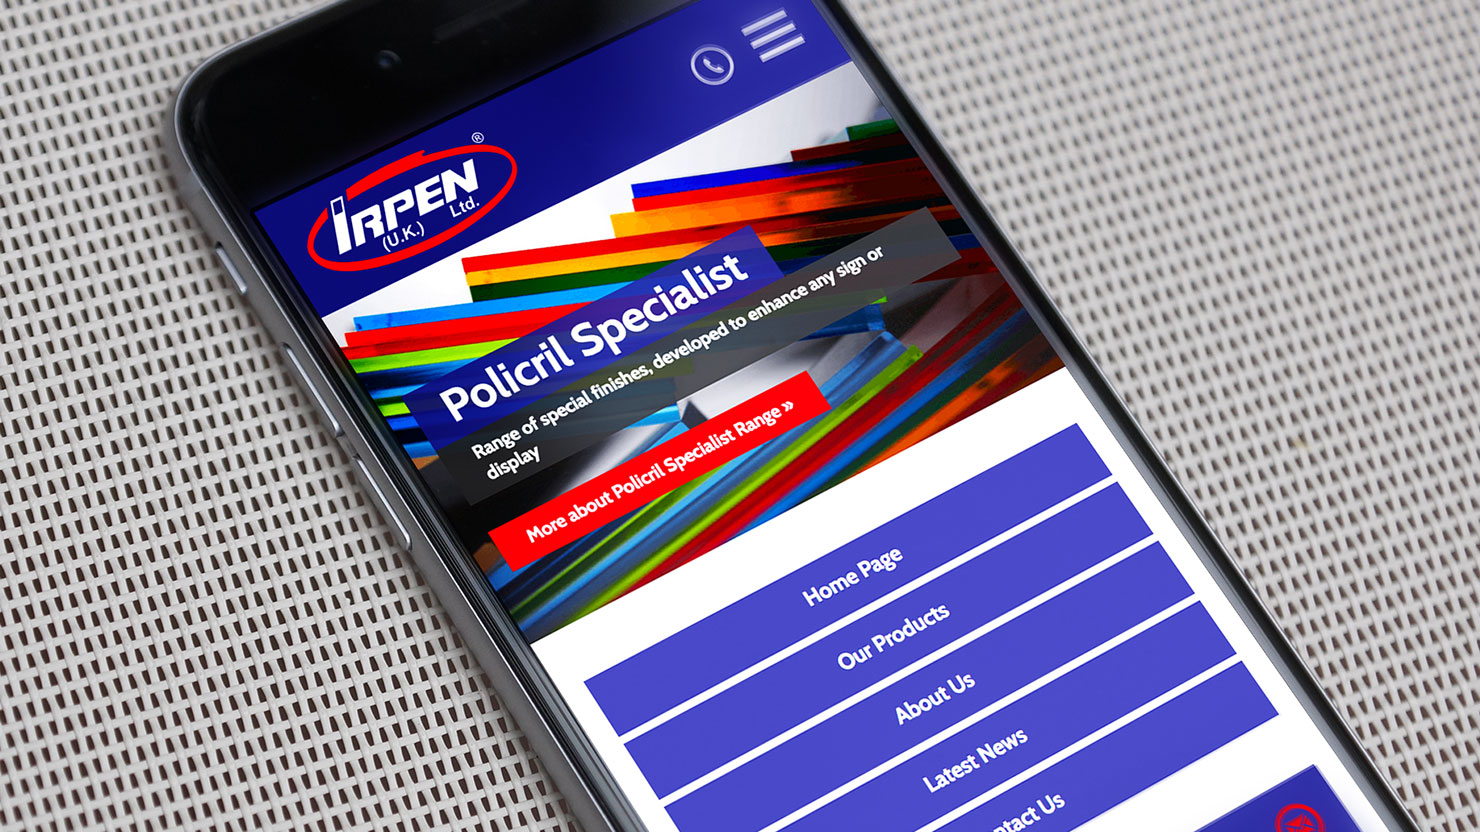 responsive website design launch for irpen uk limited